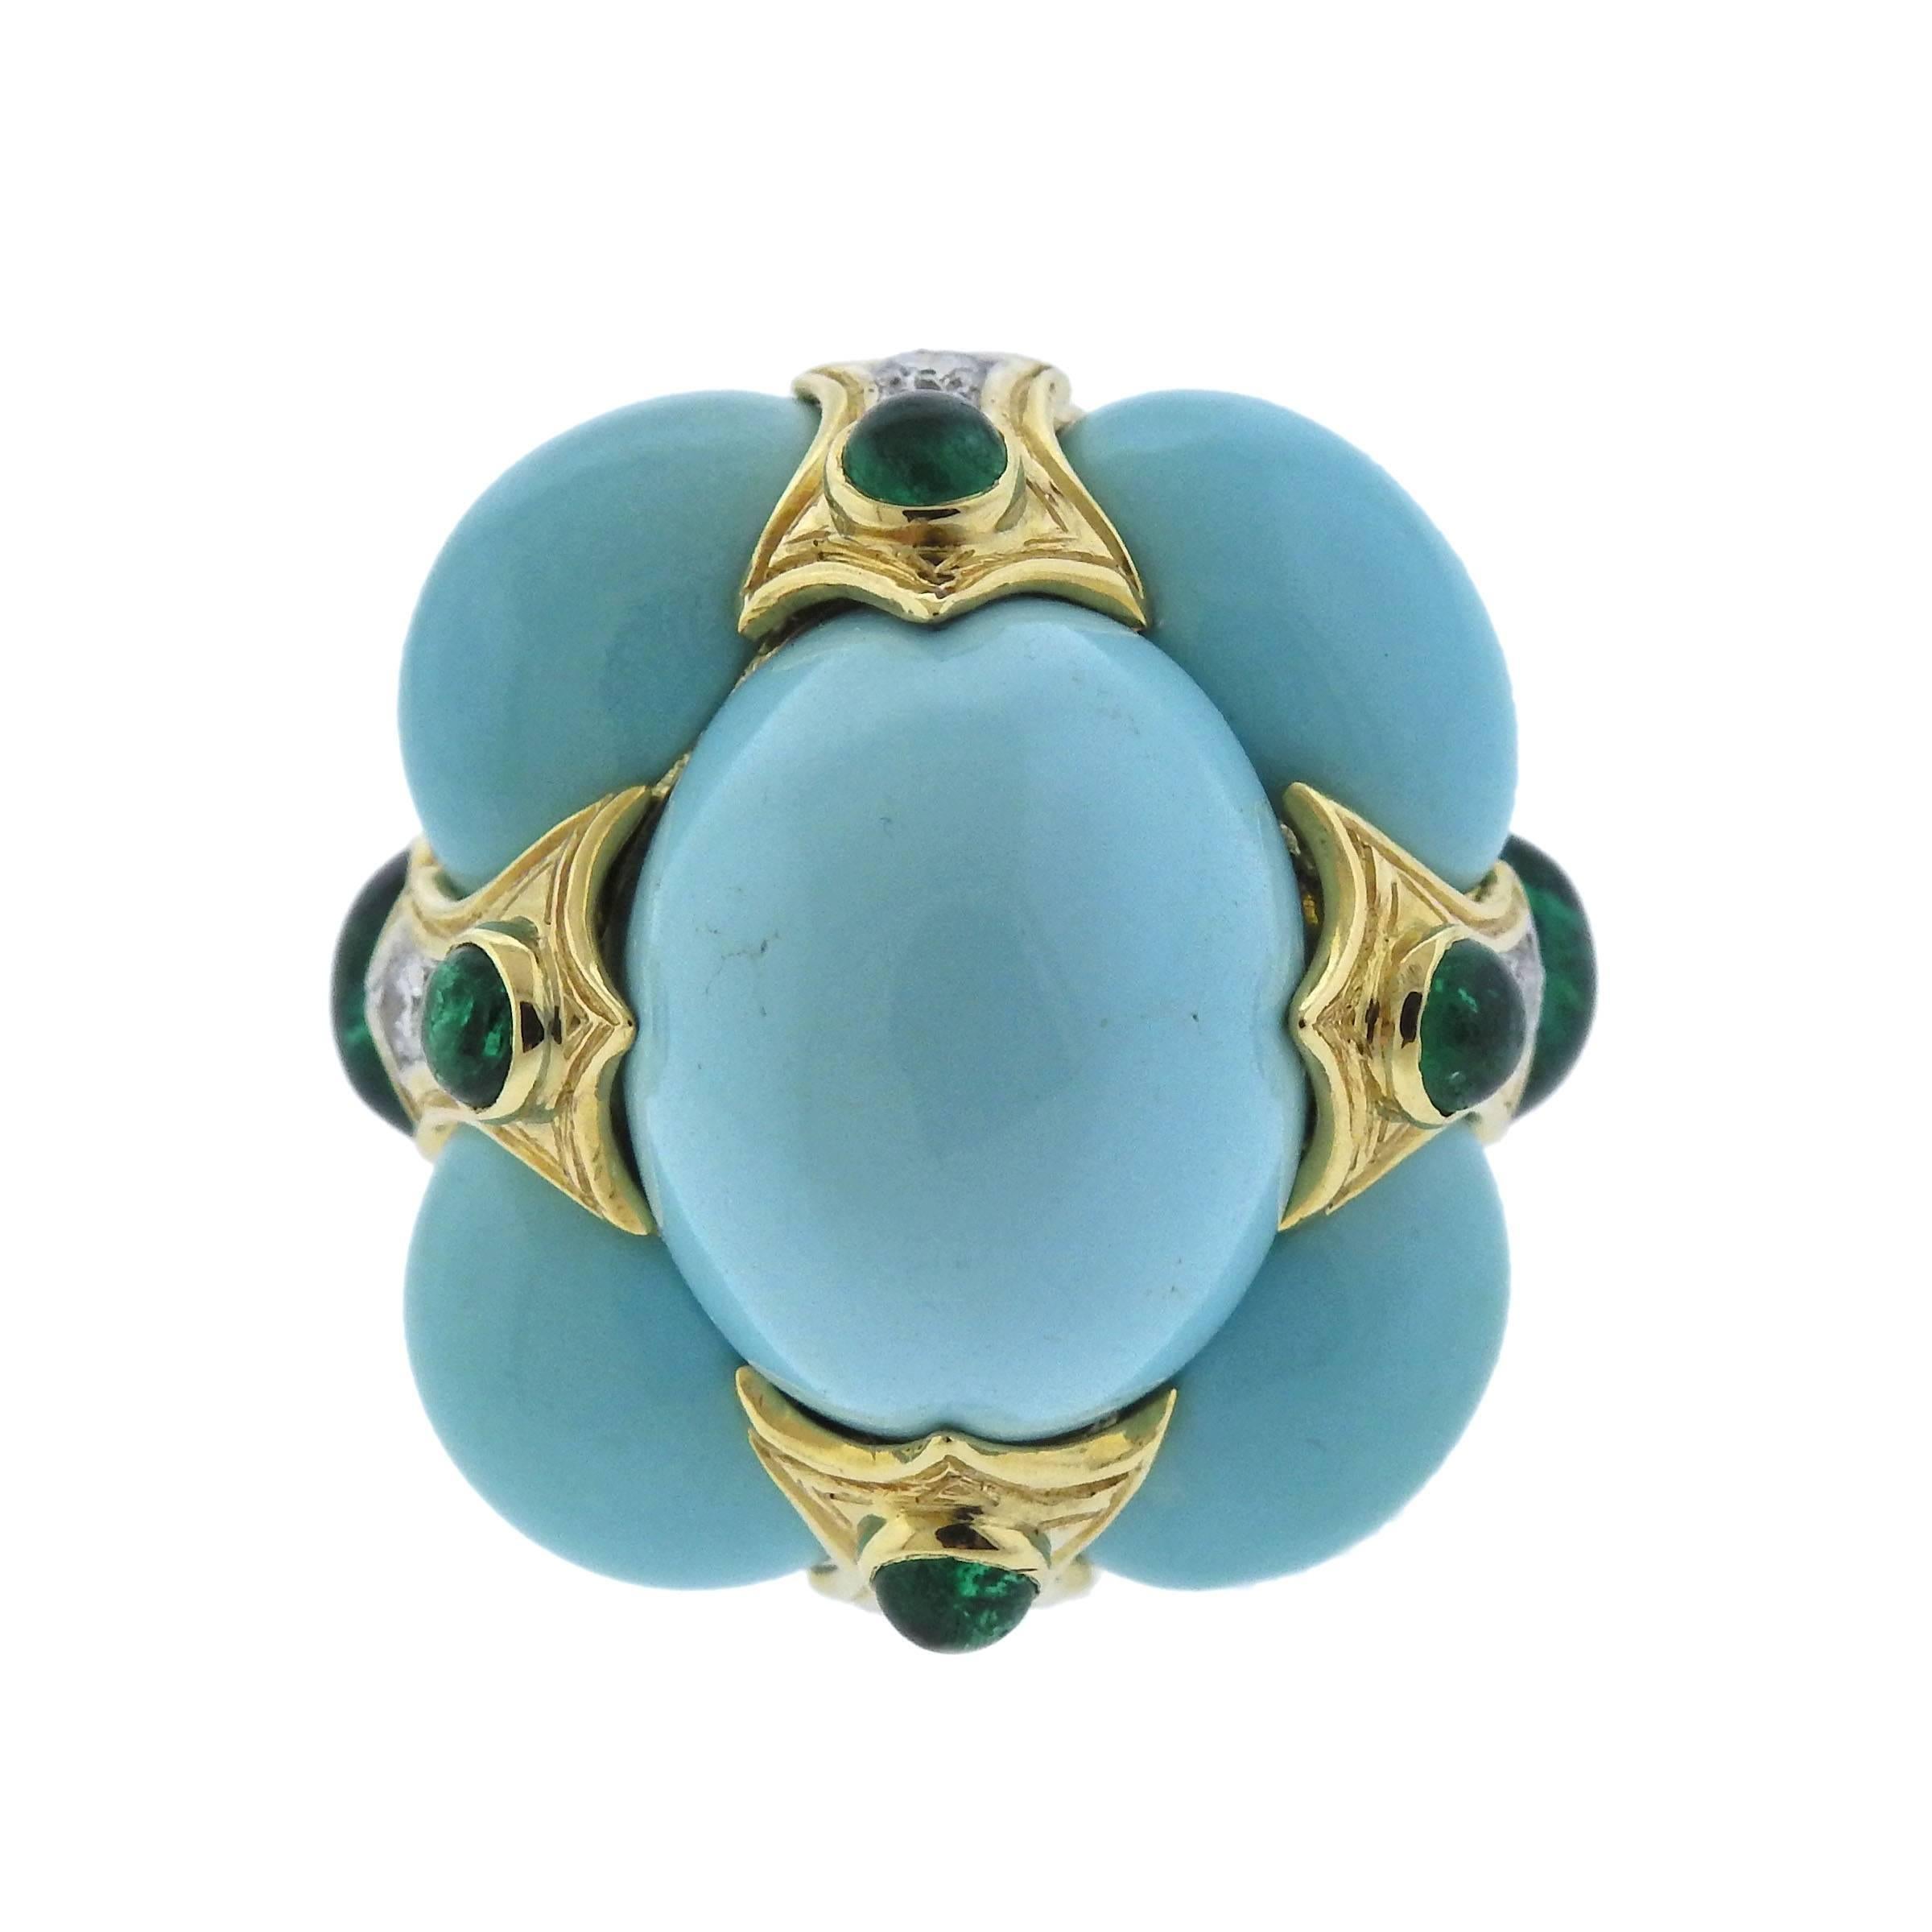  Large 18k gold and platinum cocktail ring, crafted by David Webb, set with 35.81ctw in turquoise, 2.71ctw emerald cabochons and 0.43ctw GH/VS diamonds. Retail $32000.  Ring size - 6.5, ring top - 28mm x 28mm, sits approx. 19mm from top of the